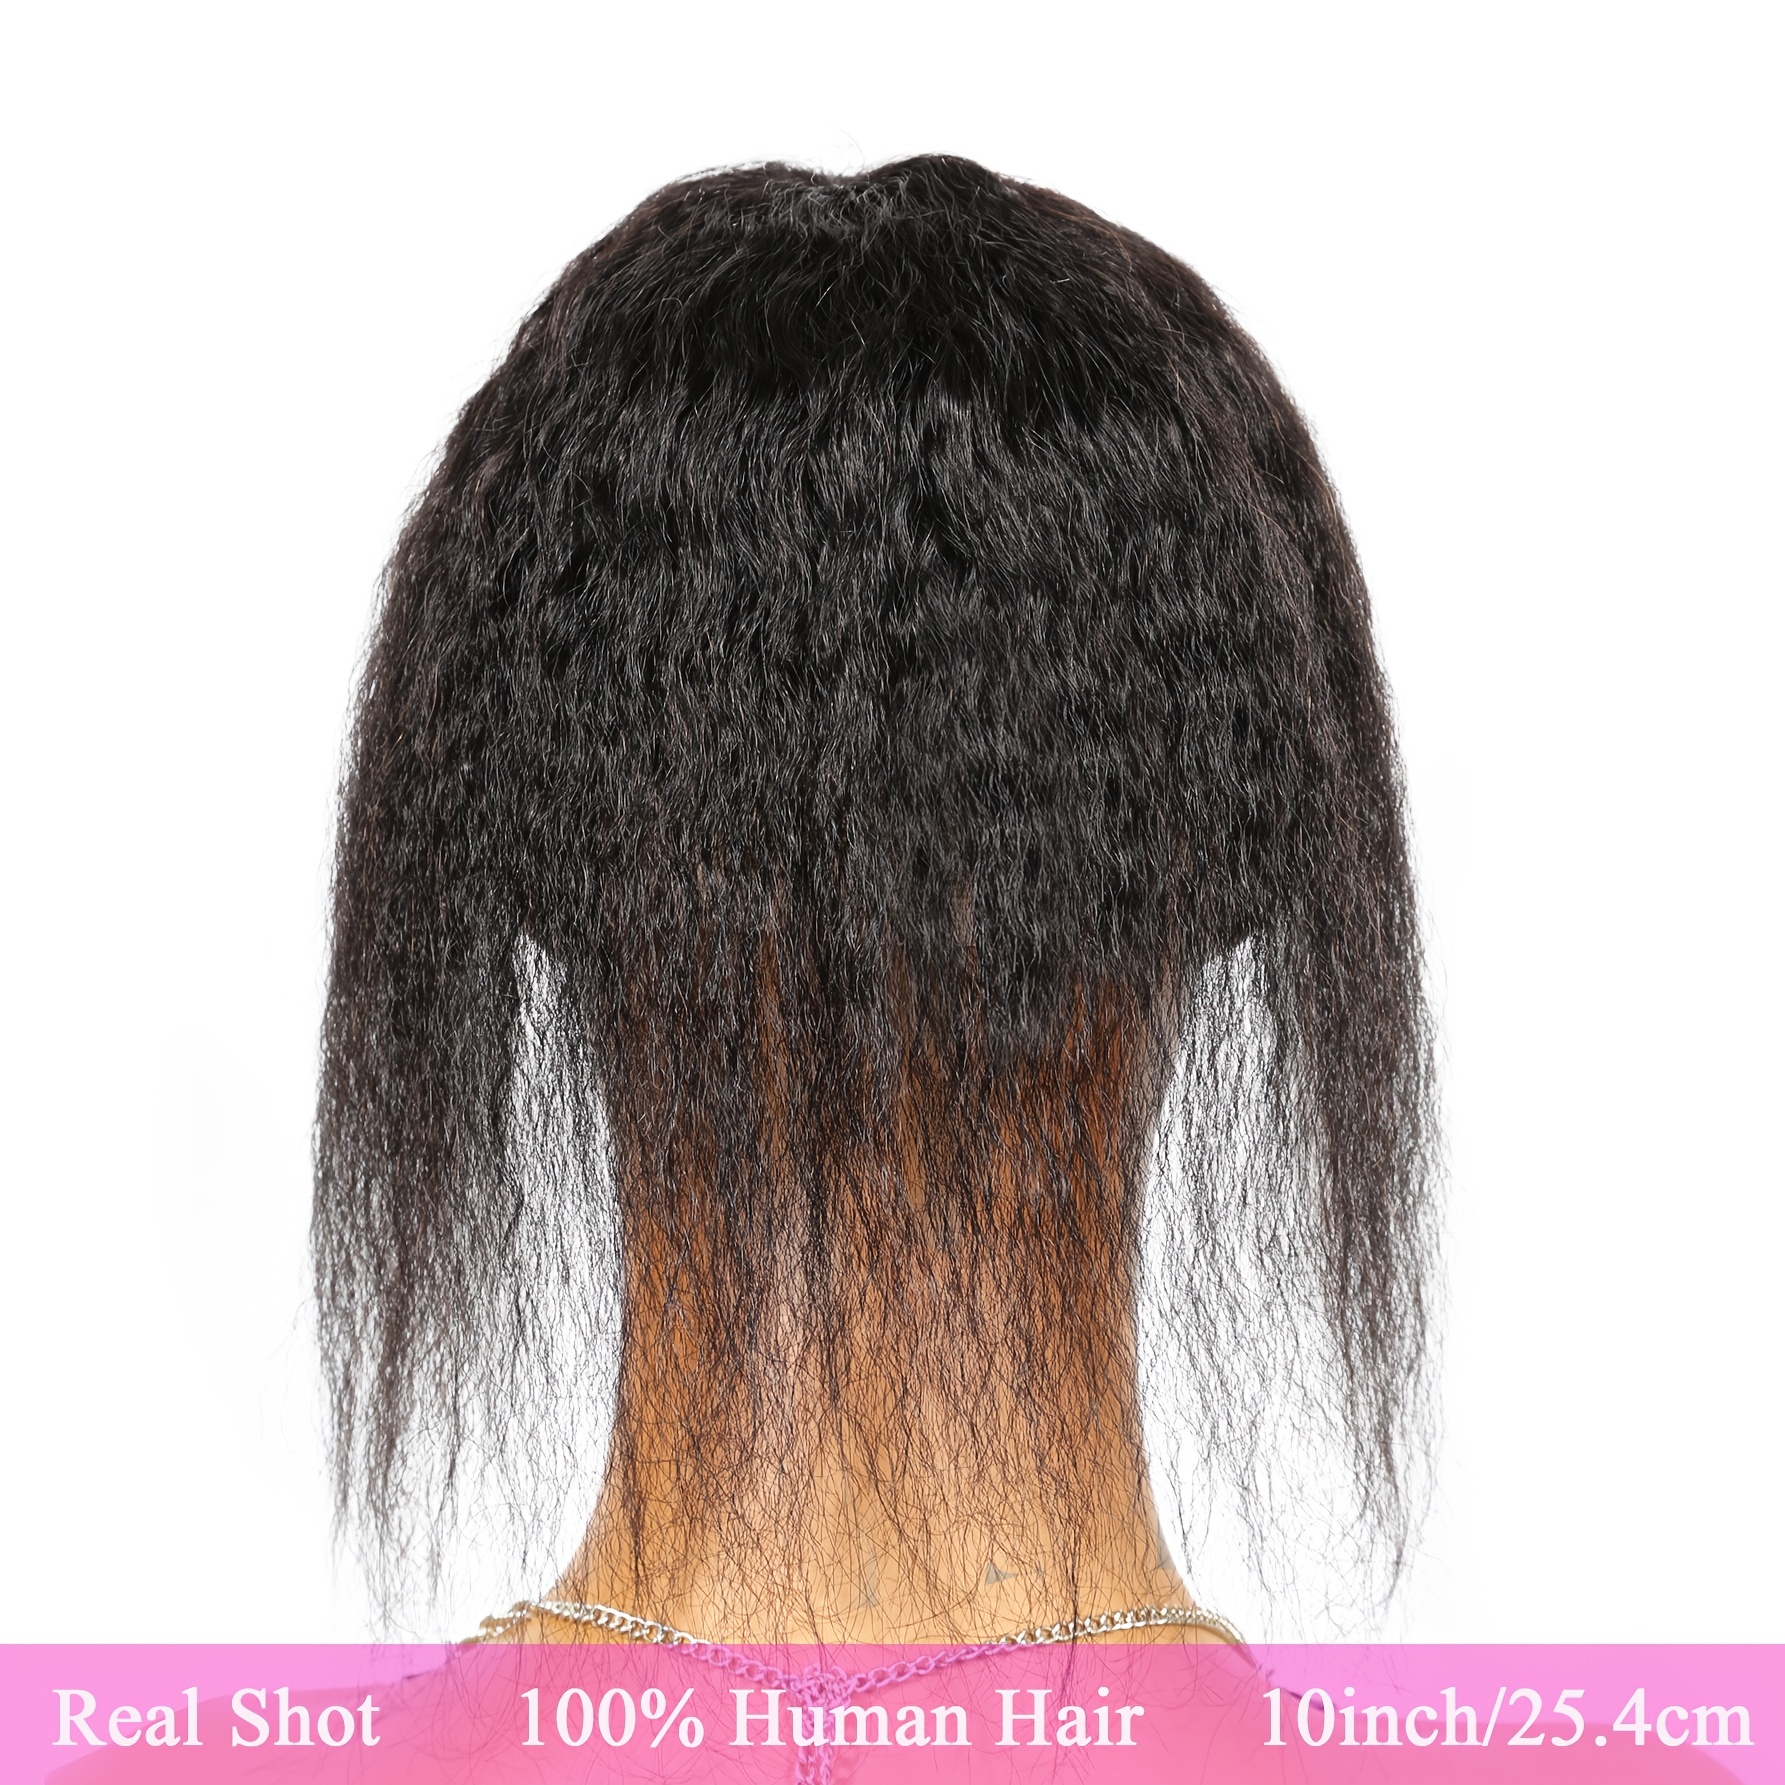 Straight Human Hair Toppers for Women Real Human Hair, 10 Inch